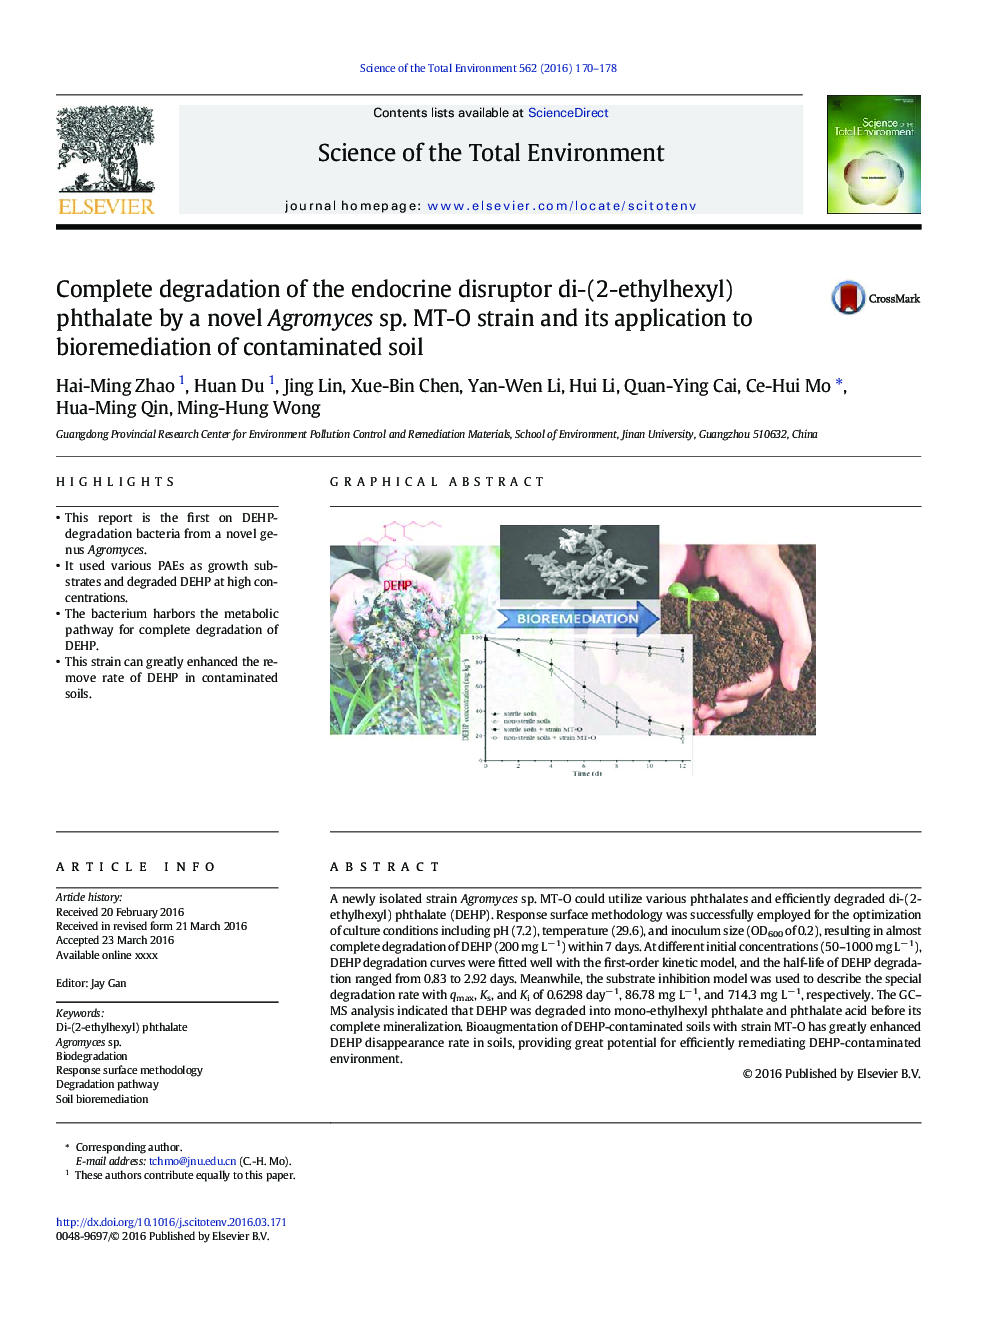 Complete degradation of the endocrine disruptor di-(2-ethylhexyl) phthalate by a novel Agromyces sp. MT-O strain and its application to bioremediation of contaminated soil